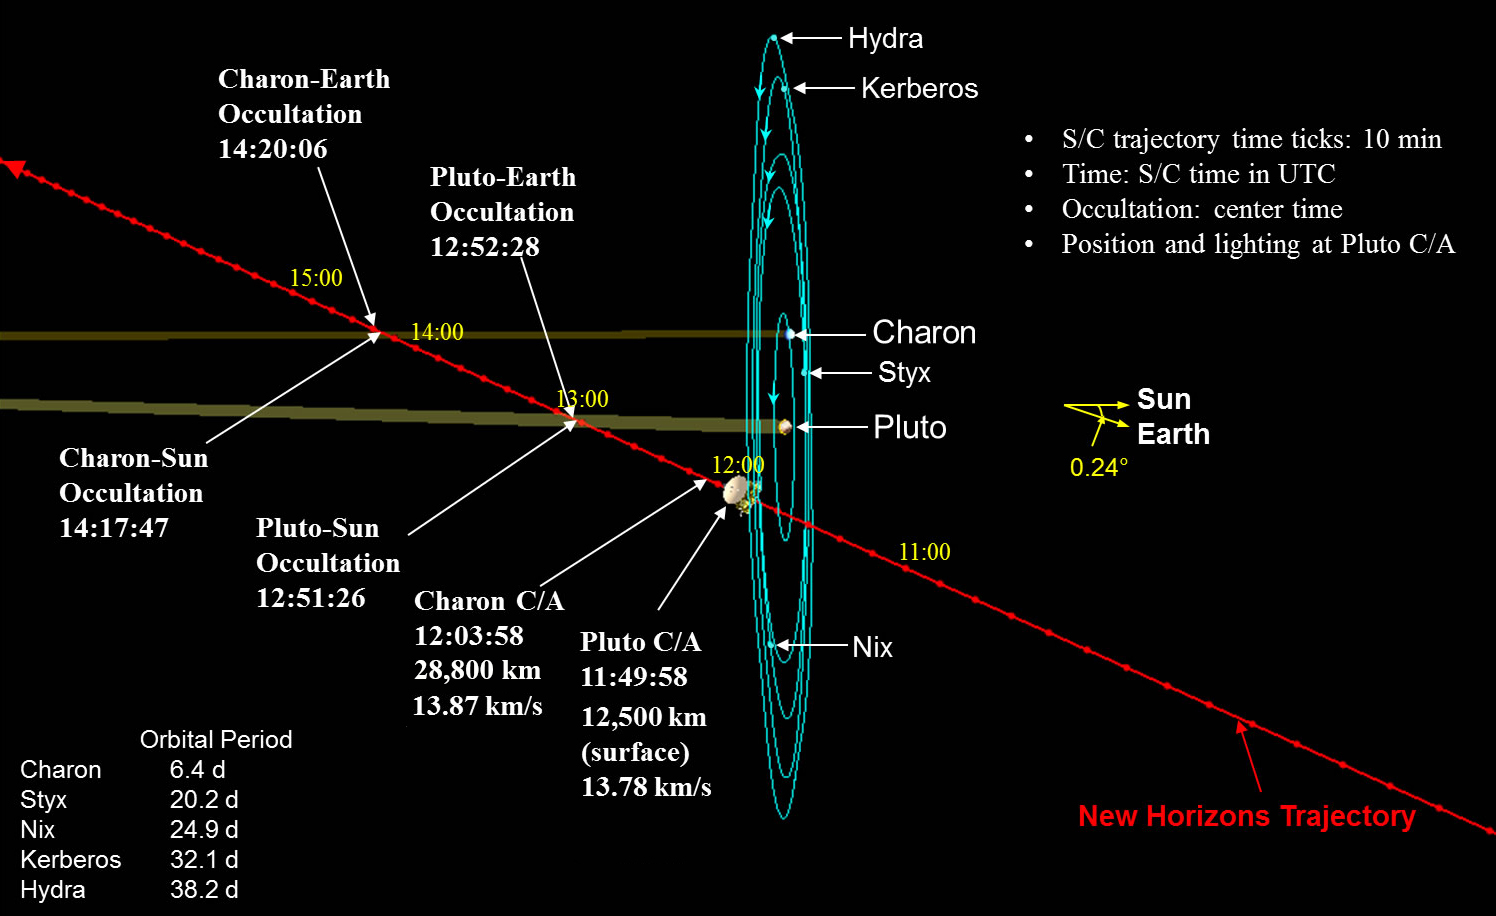 New Horizons will pass within 10,000 km of Pluto at its closest approach, which will put the spacecraft well within the orbits of Pluto's outer moons, in a trajectory that will provide an additional protection against any potential hazards from dust debris rings or moonlets that may lurk around Pluto. Image Credit: NASA/JHU/APL